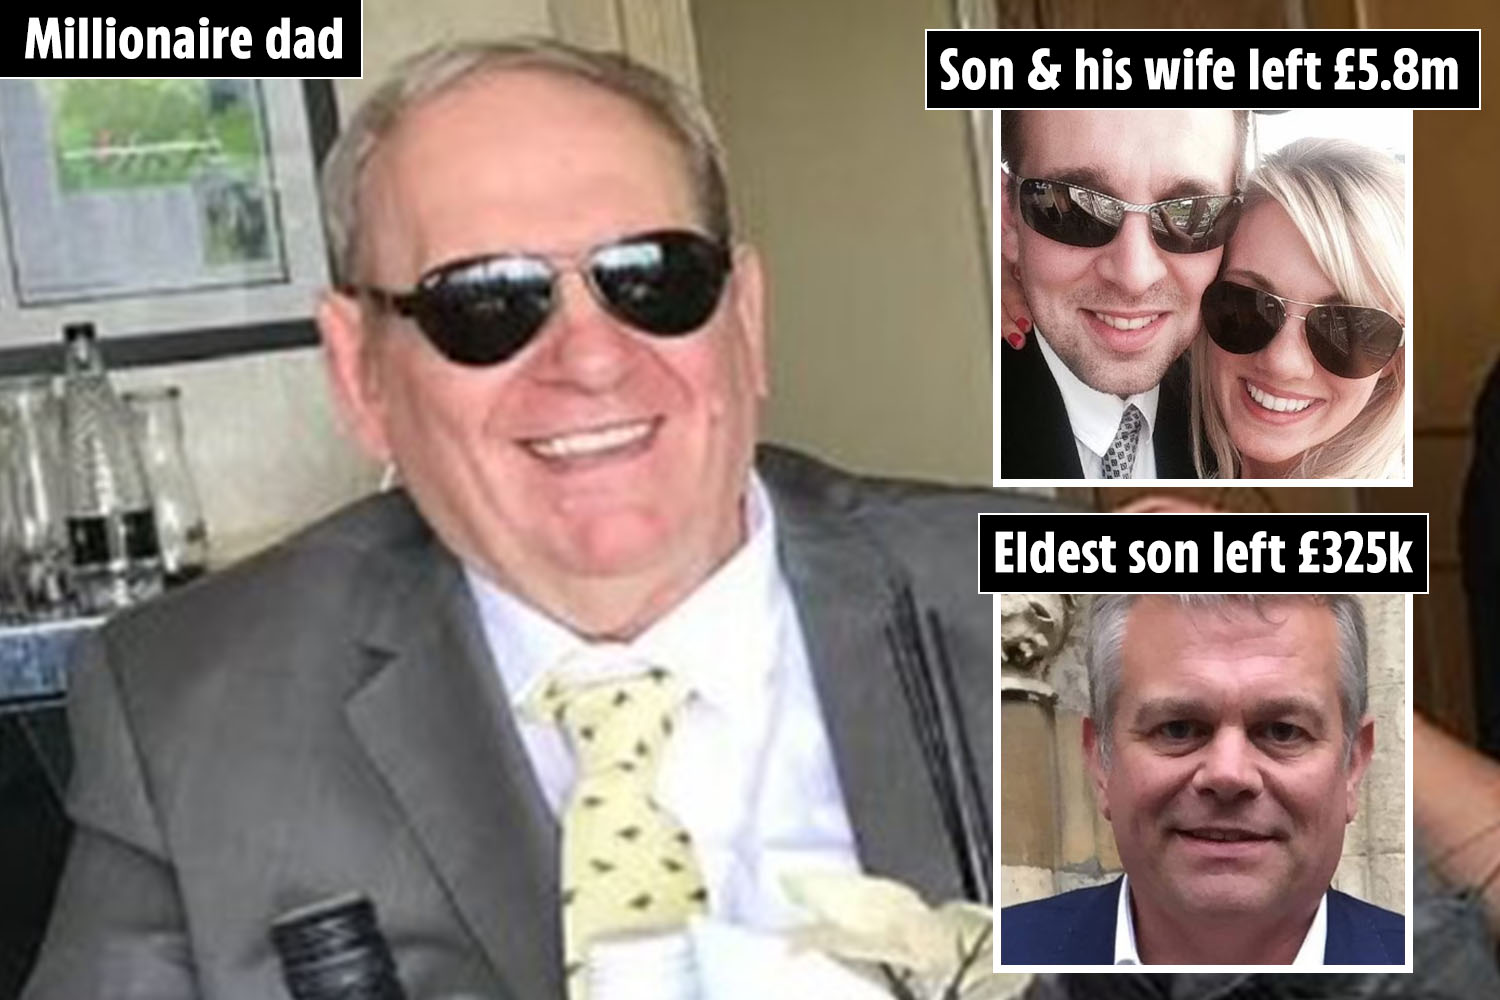 Family locked in inheritance row as dad left sons £5.8m - but siblings got £325k